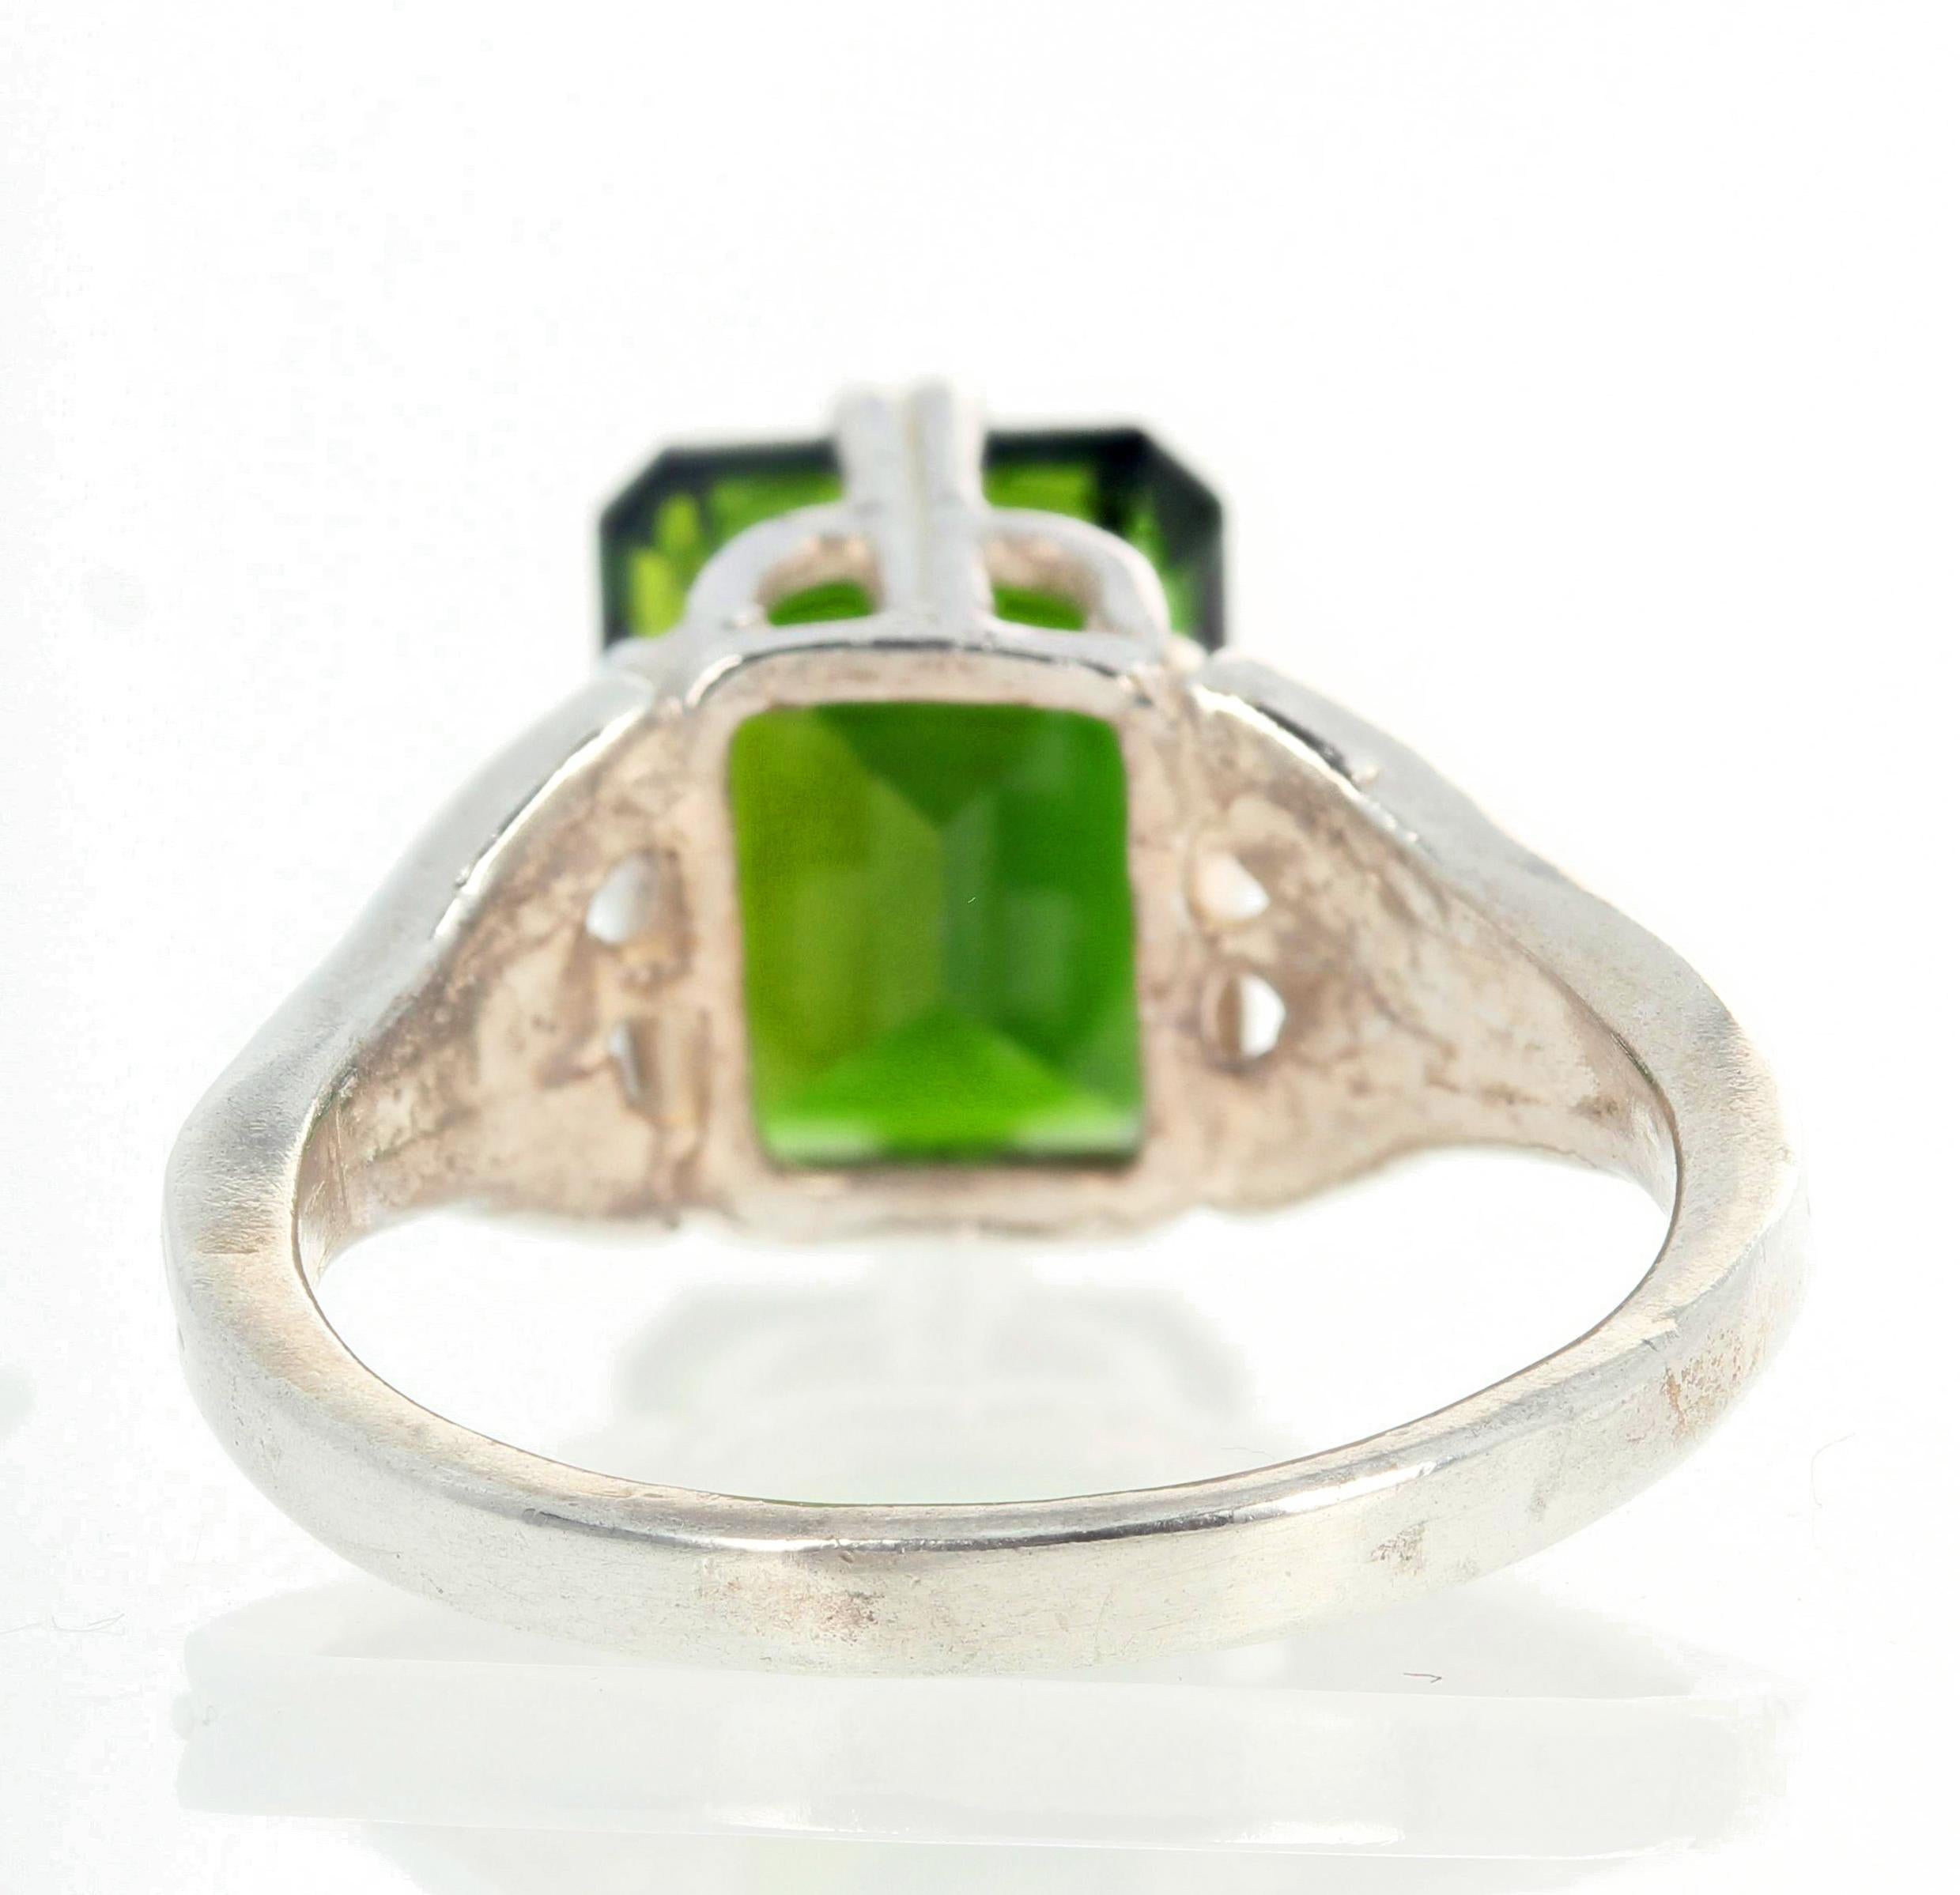 AJD Glowing Deep Green 2.8 Carat Chrome Diopside Sterling Silver Ring Neuf - En vente à Raleigh, NC